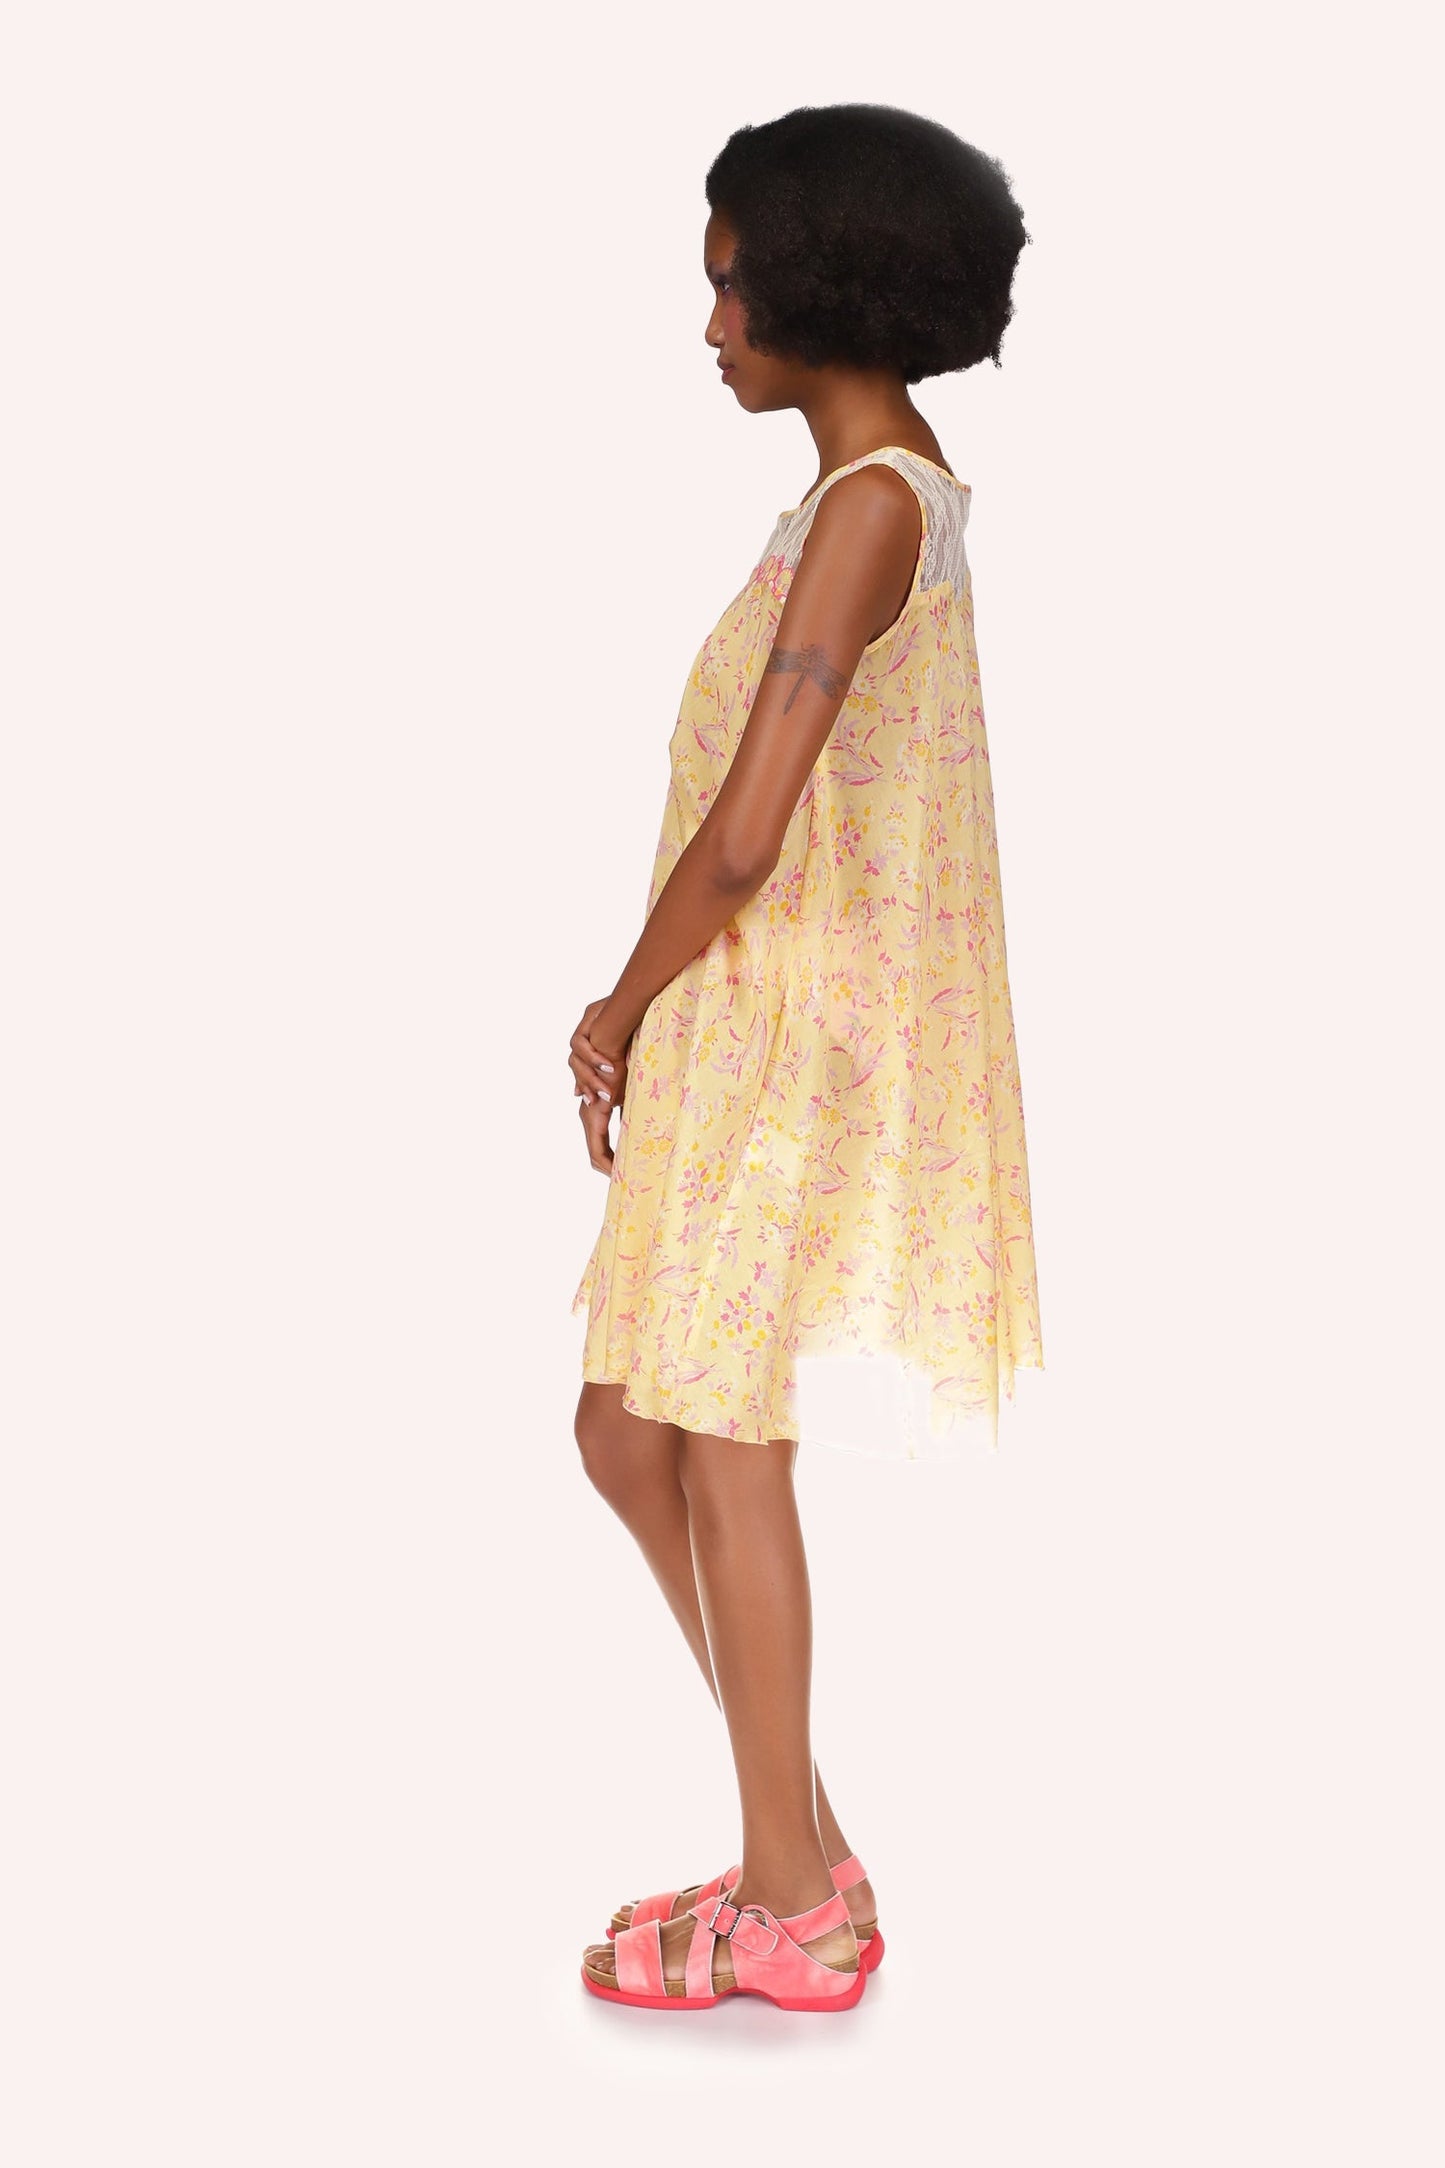 Arcadia Blossom Sleeveless Dress, yellow with small red spots